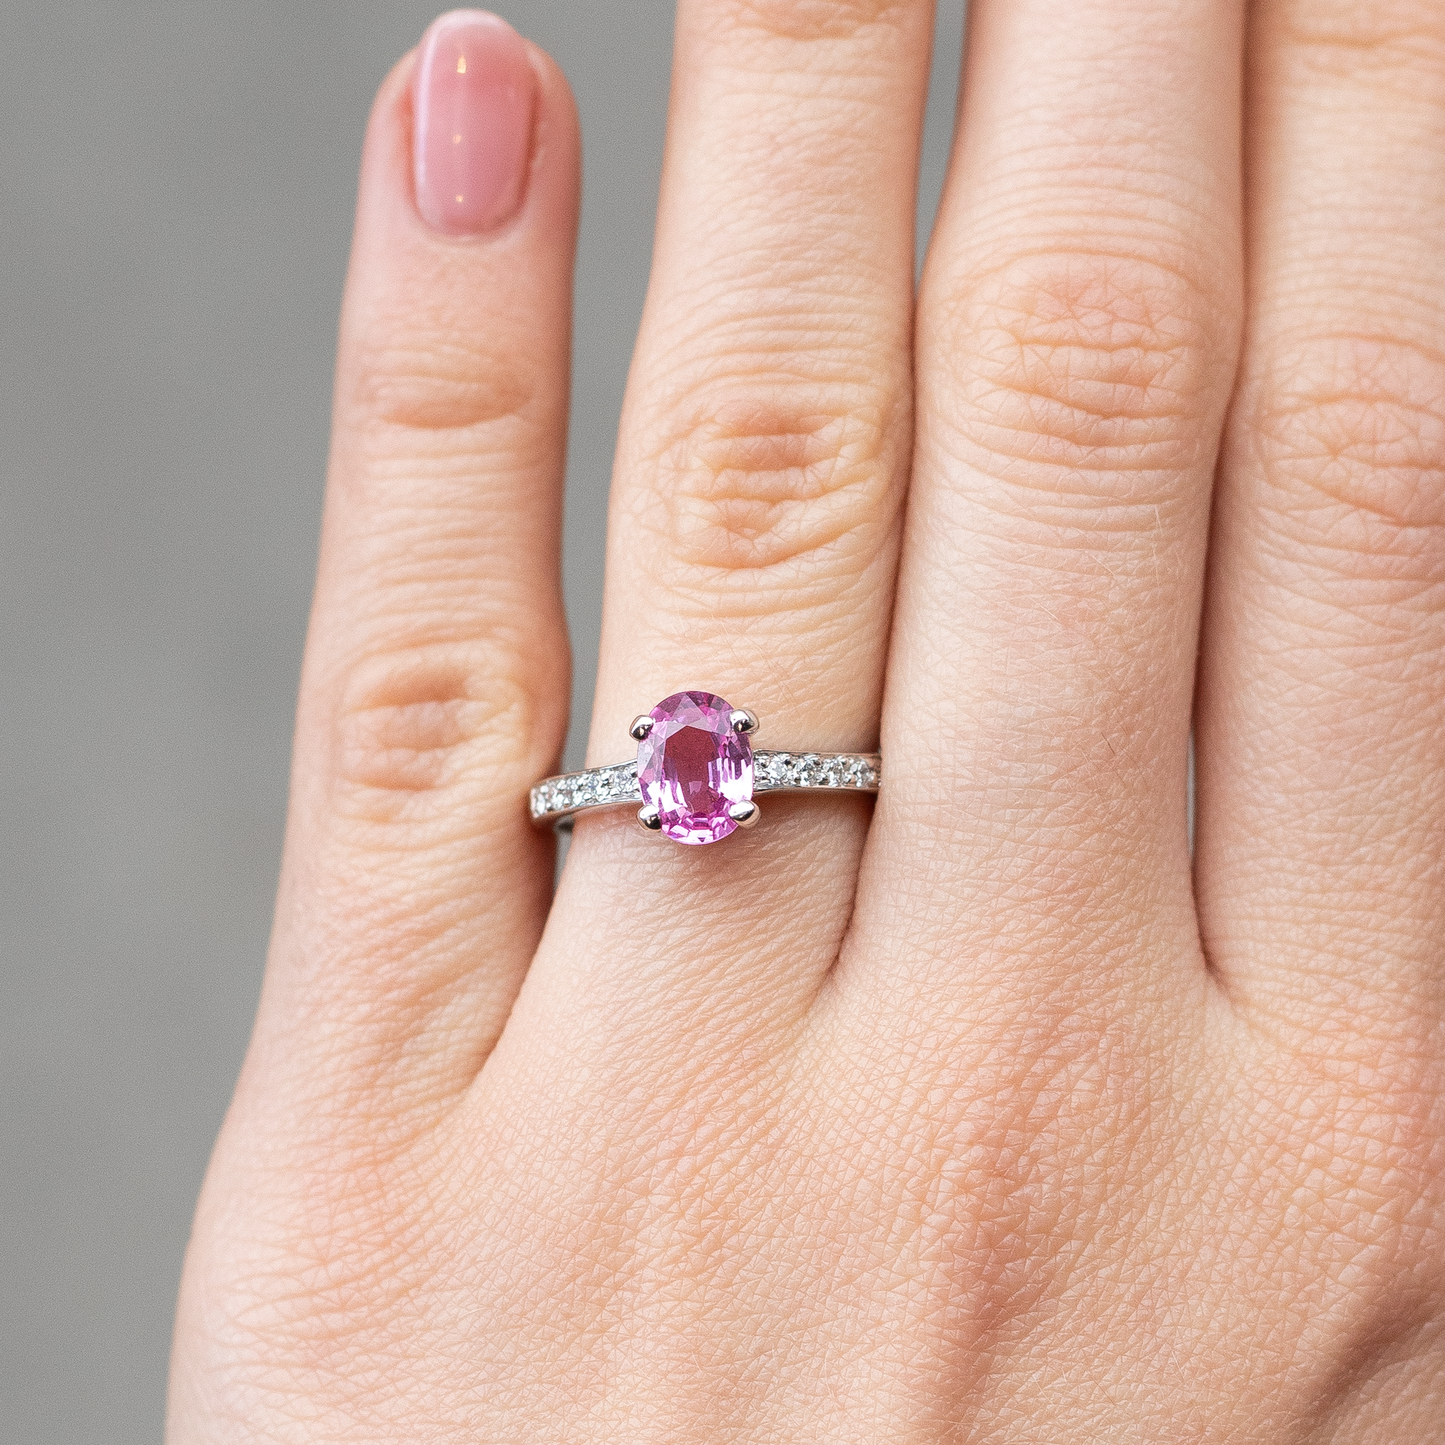 0.89ct Oval Cut Pink Sapphire Ring